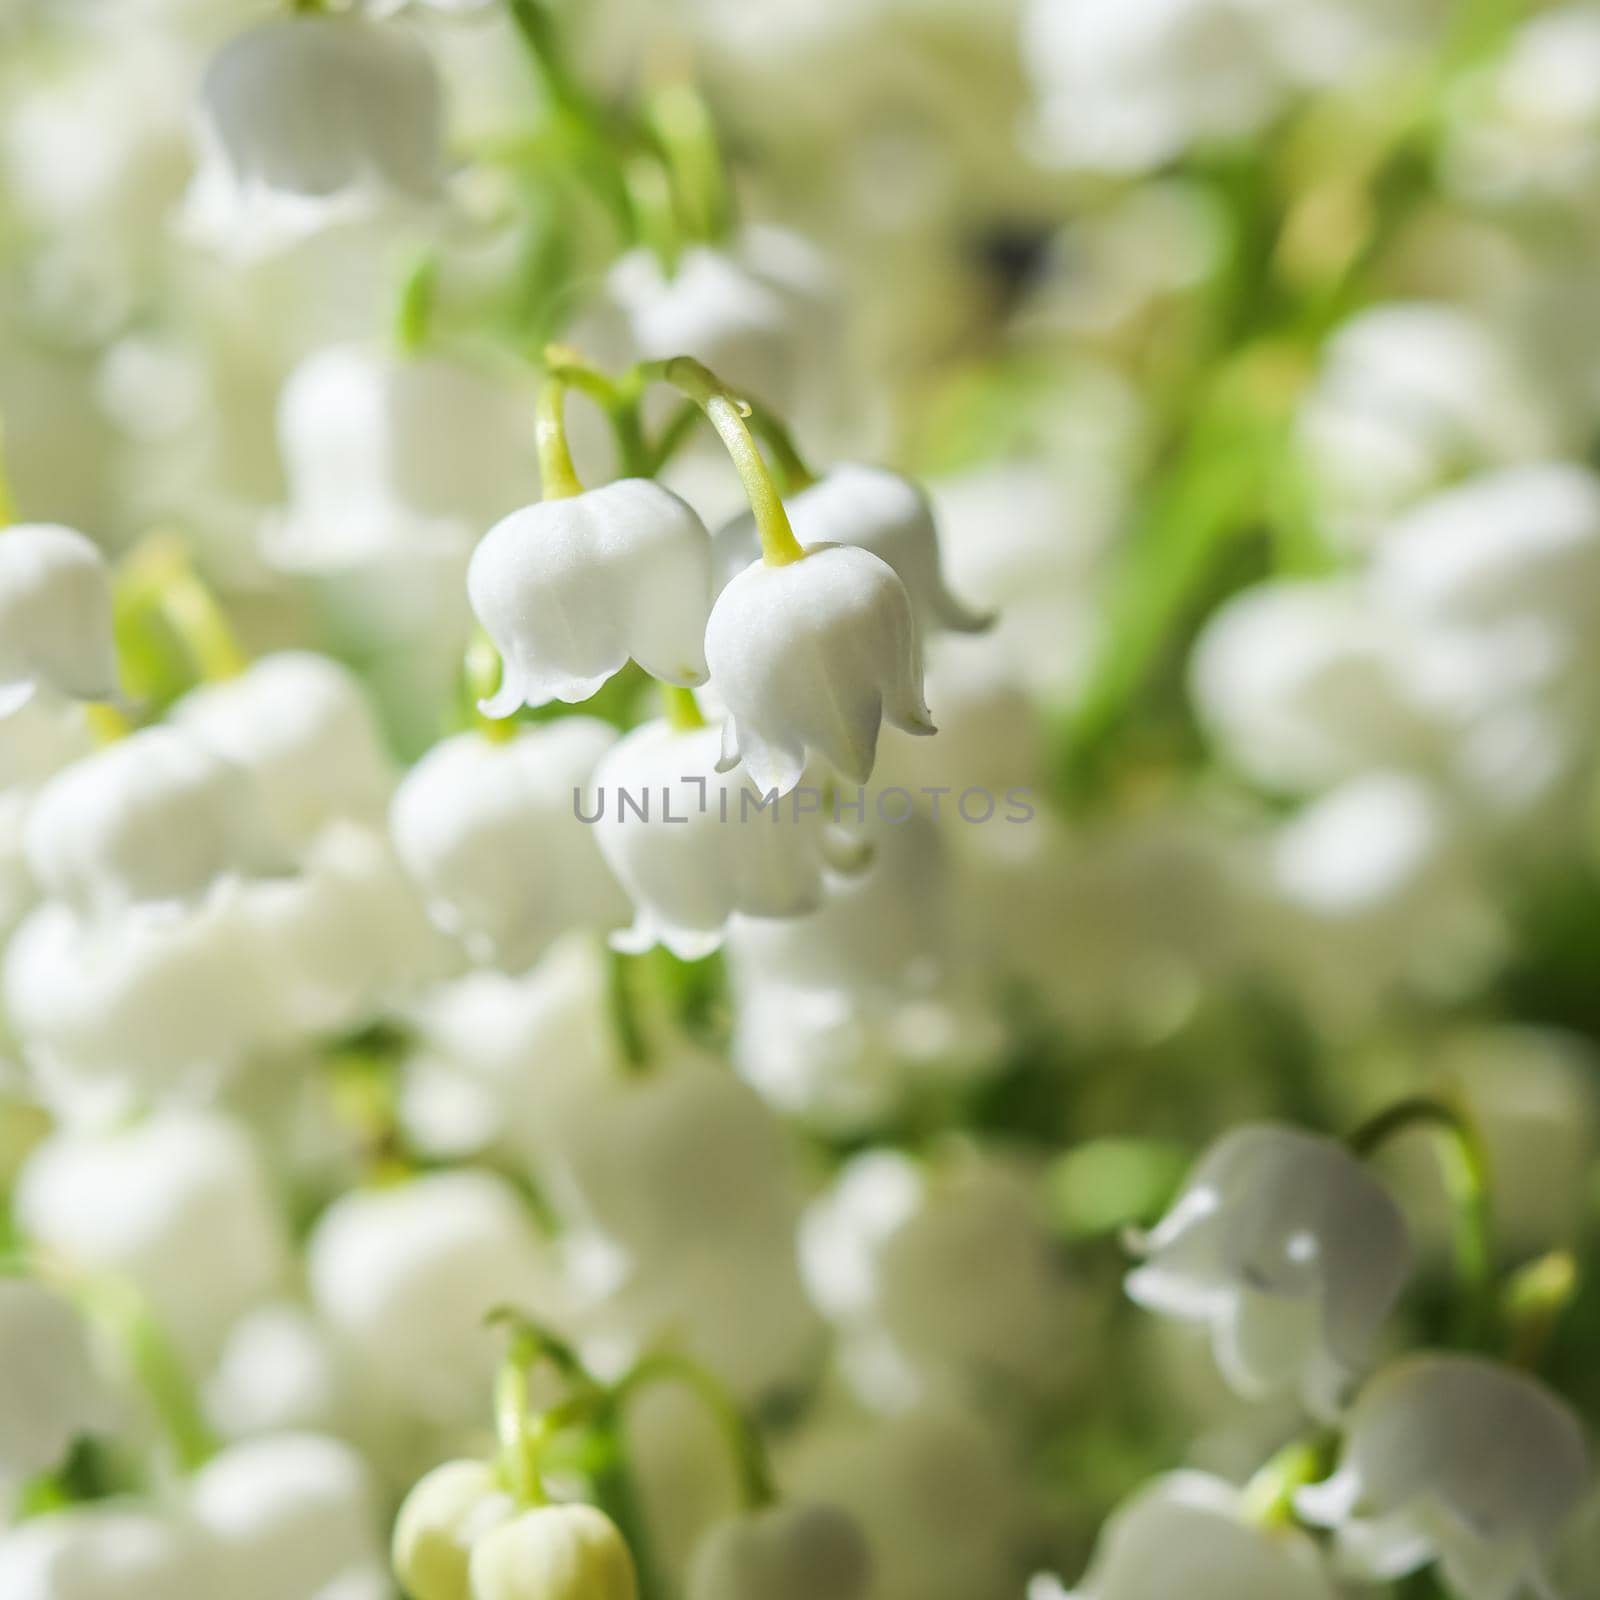 Blooming lily of the valley flowers. Natural floral background. Selective focus